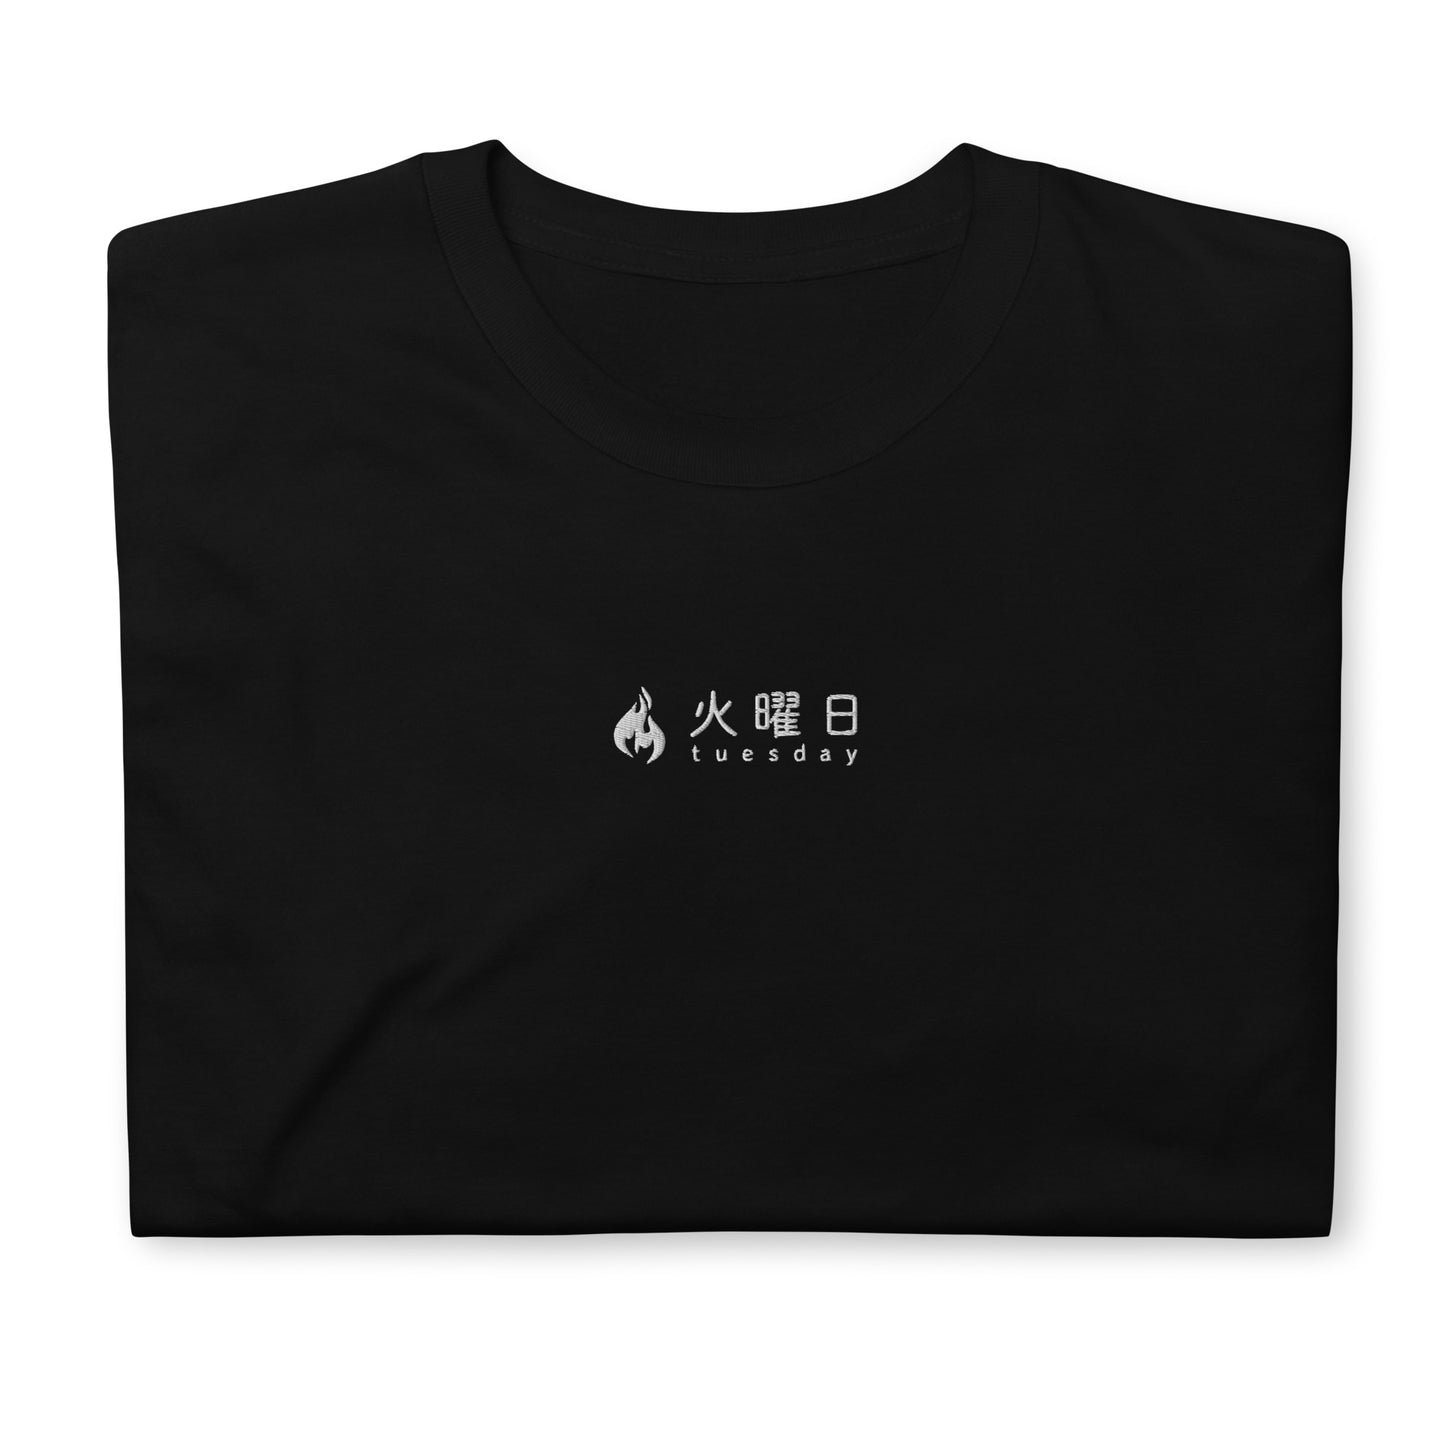 Black High Quality Tee - Front Design with an Black embroidery "Tuesday" in Japanese and English